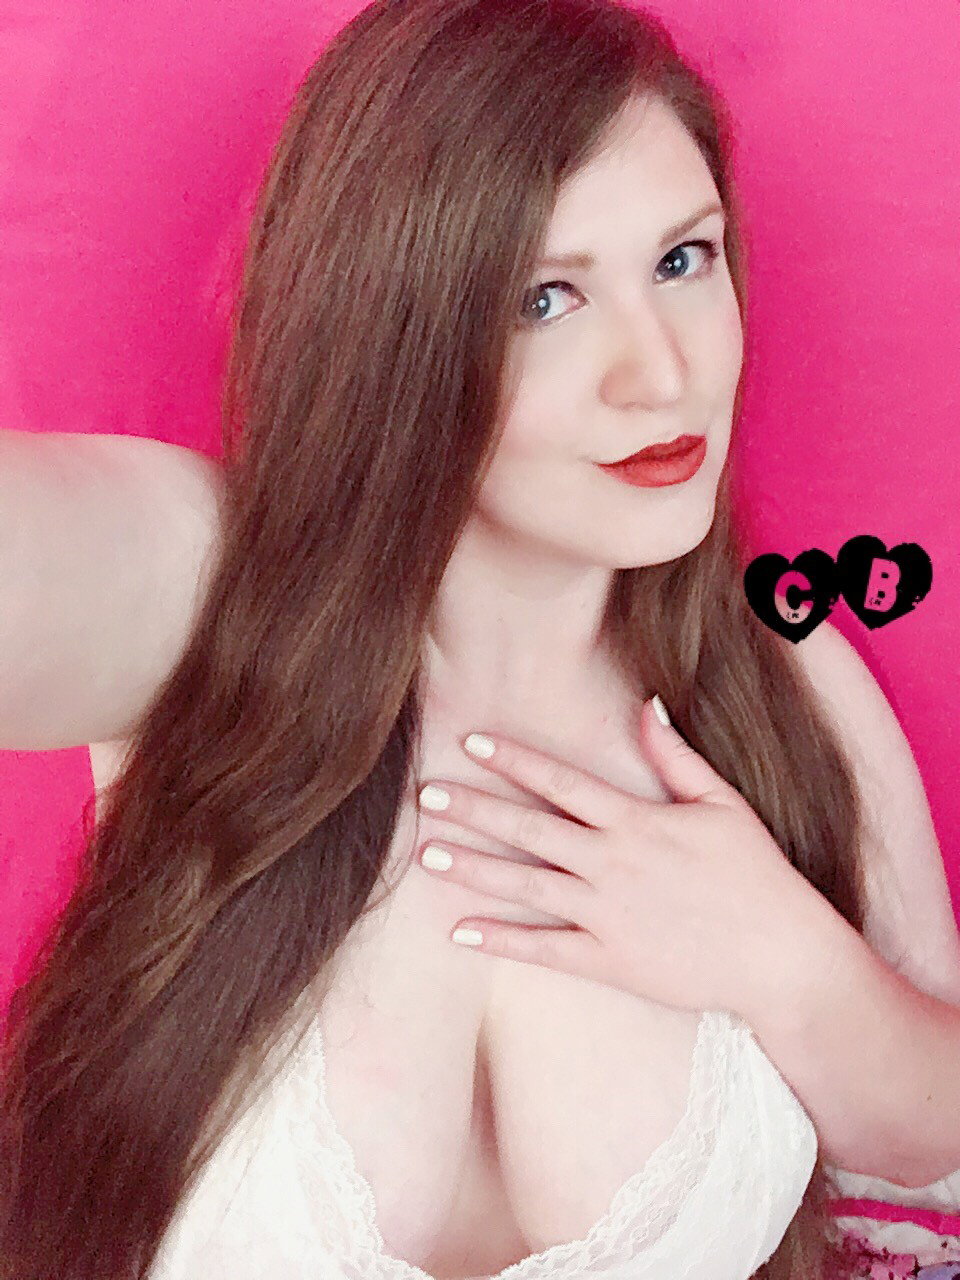 Photo by CamgirlBrielle with the username @CamgirlBrielle,  September 27, 2019 at 4:31 PM. The post is about the topic Auburn Haired Vixen and the text says 'Be still my heart!

#RedLips #RedHair #LongHair'